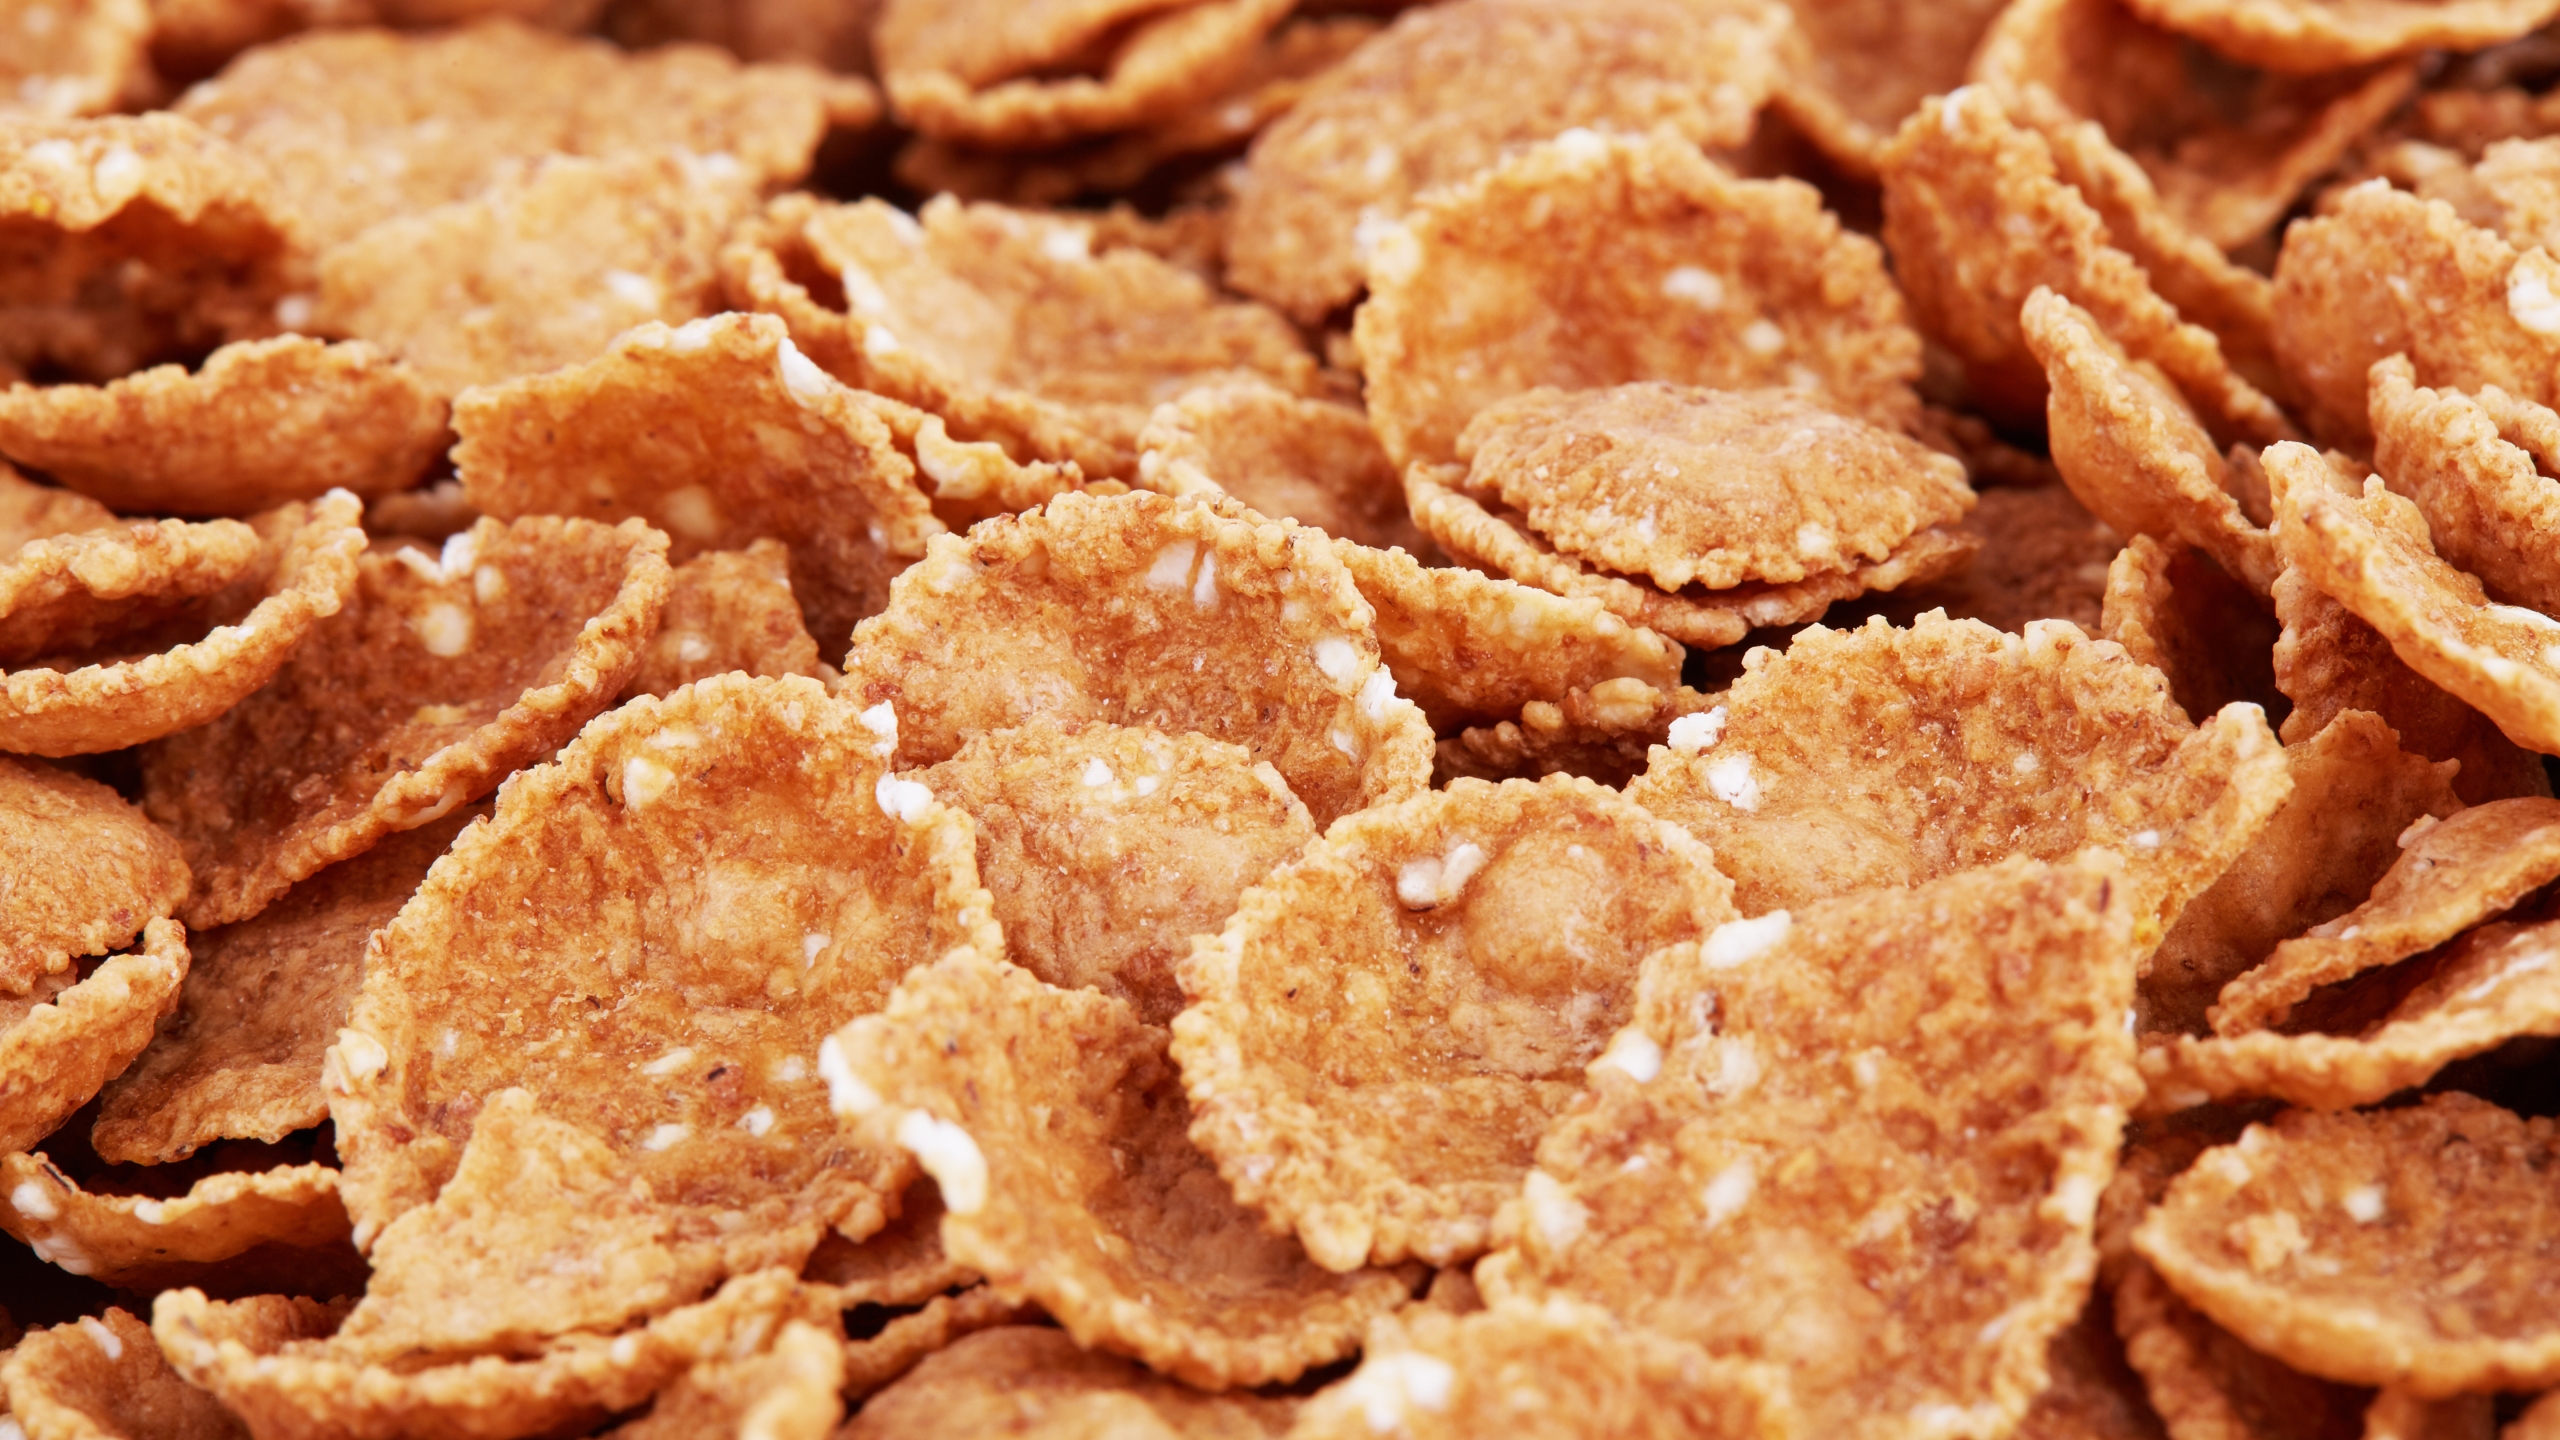 Customs Inspectors Find Cocaine Coated Corn Flakes In Ohio